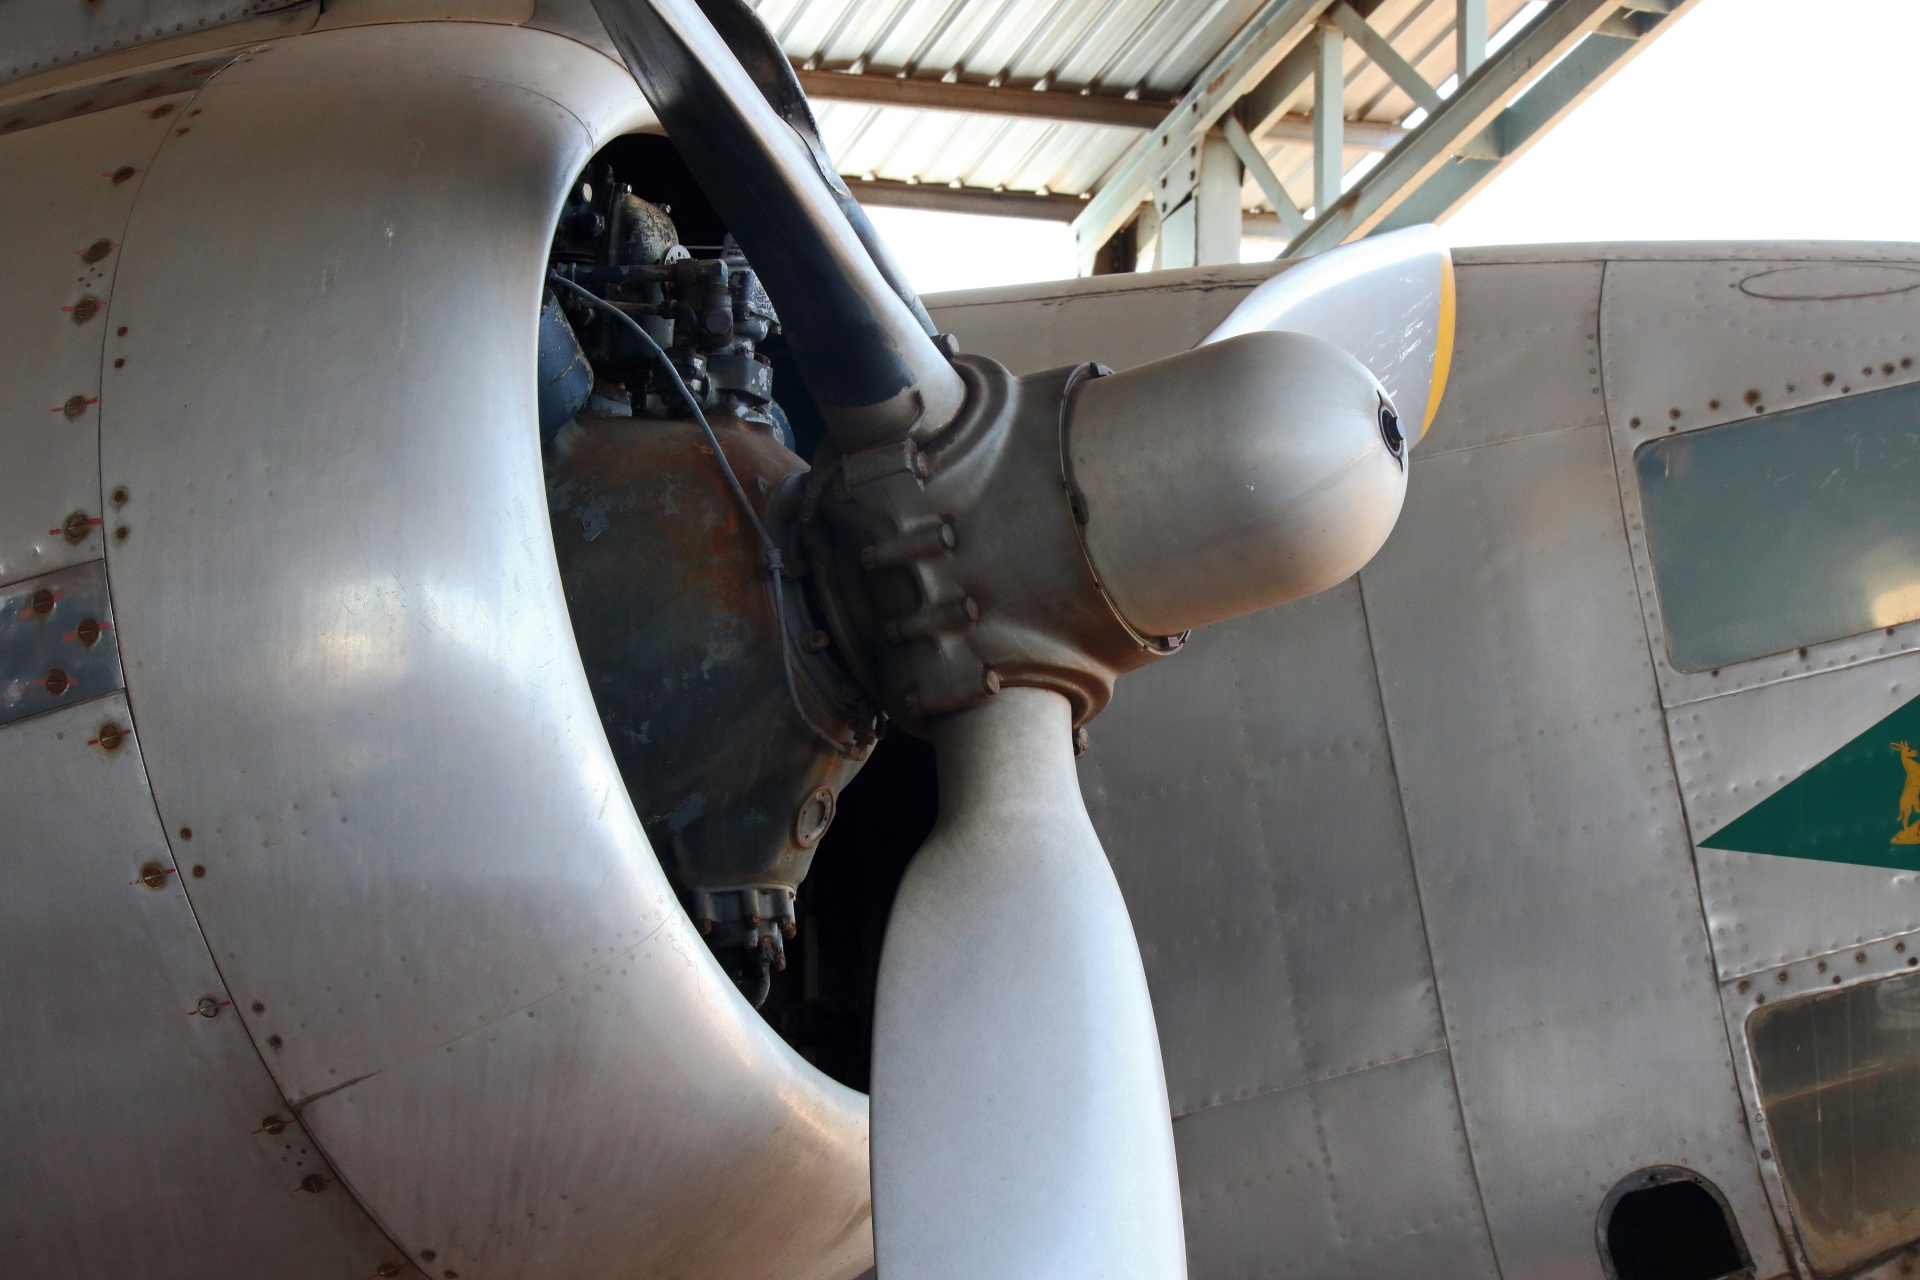 close view of propeller of vintage aircraft on display